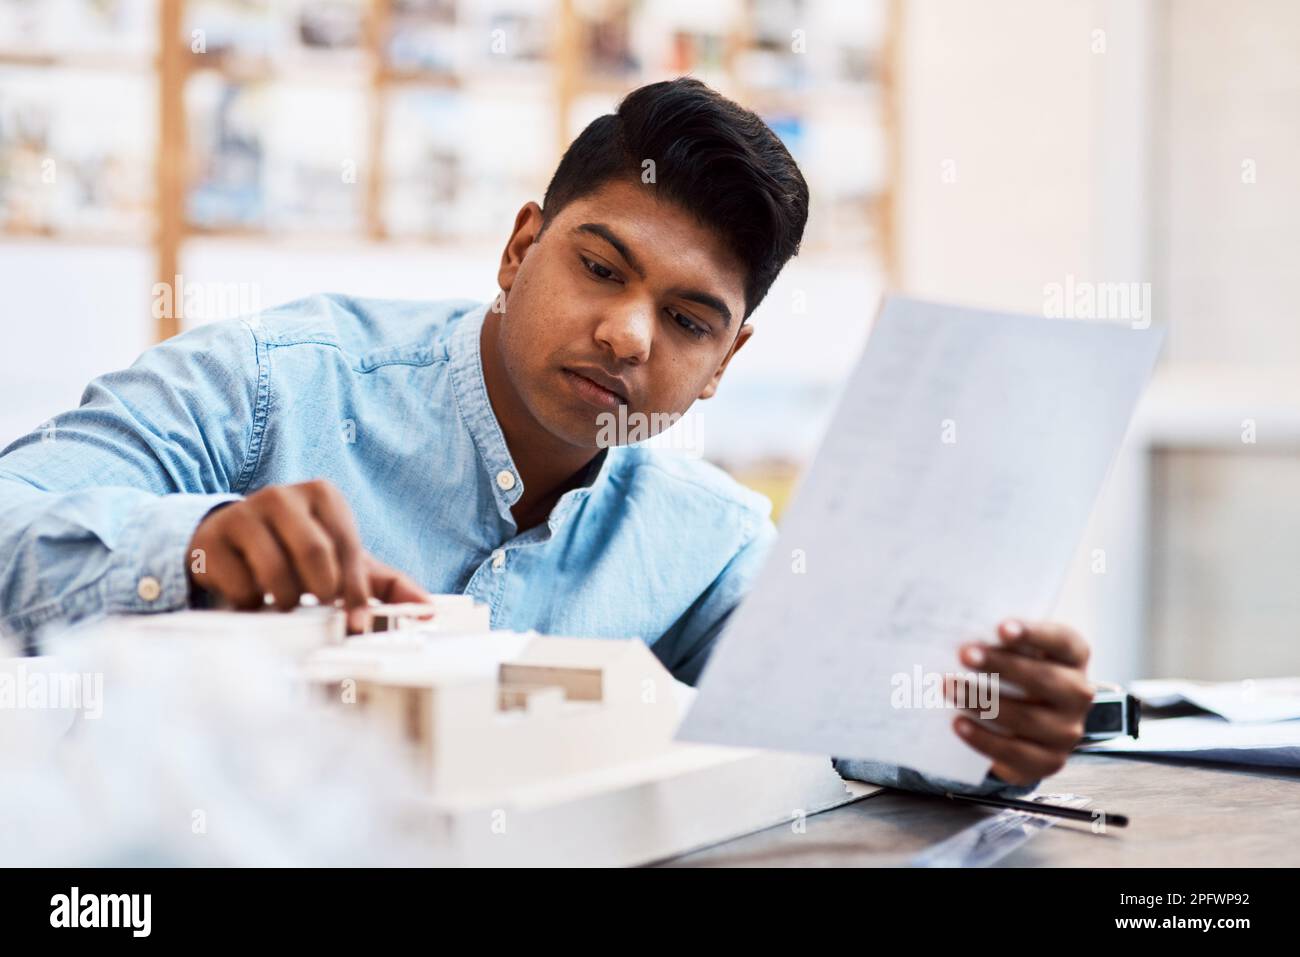 Nothing goes unnoticed. a young architect designing a building model in a modern office. Stock Photo